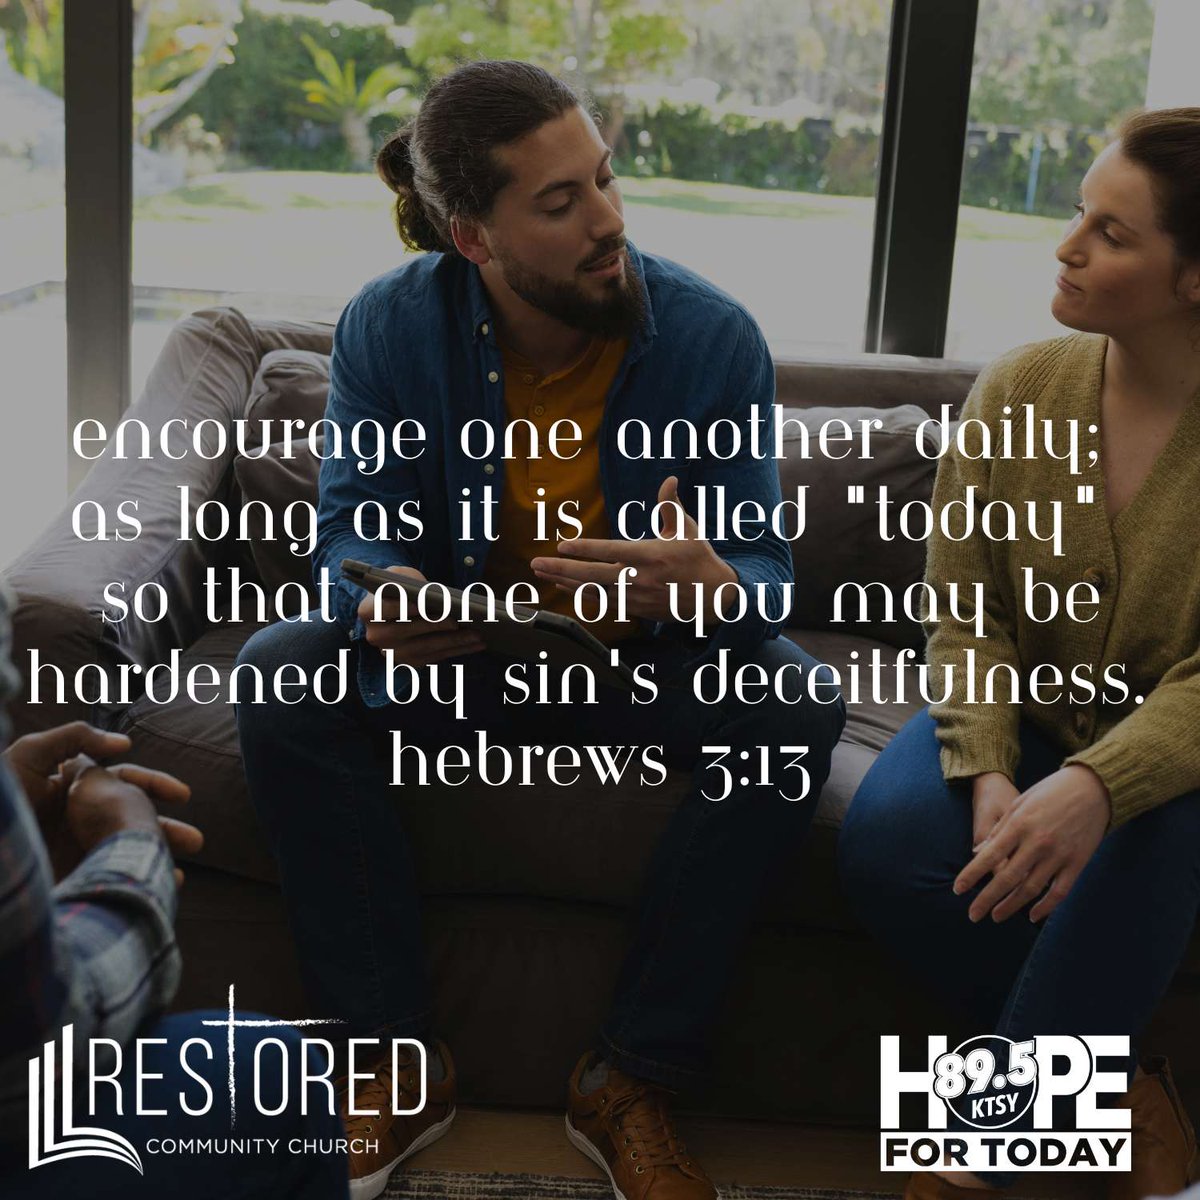 Who can you encourage today? #hopefortoday #choosehope #bible #scripture